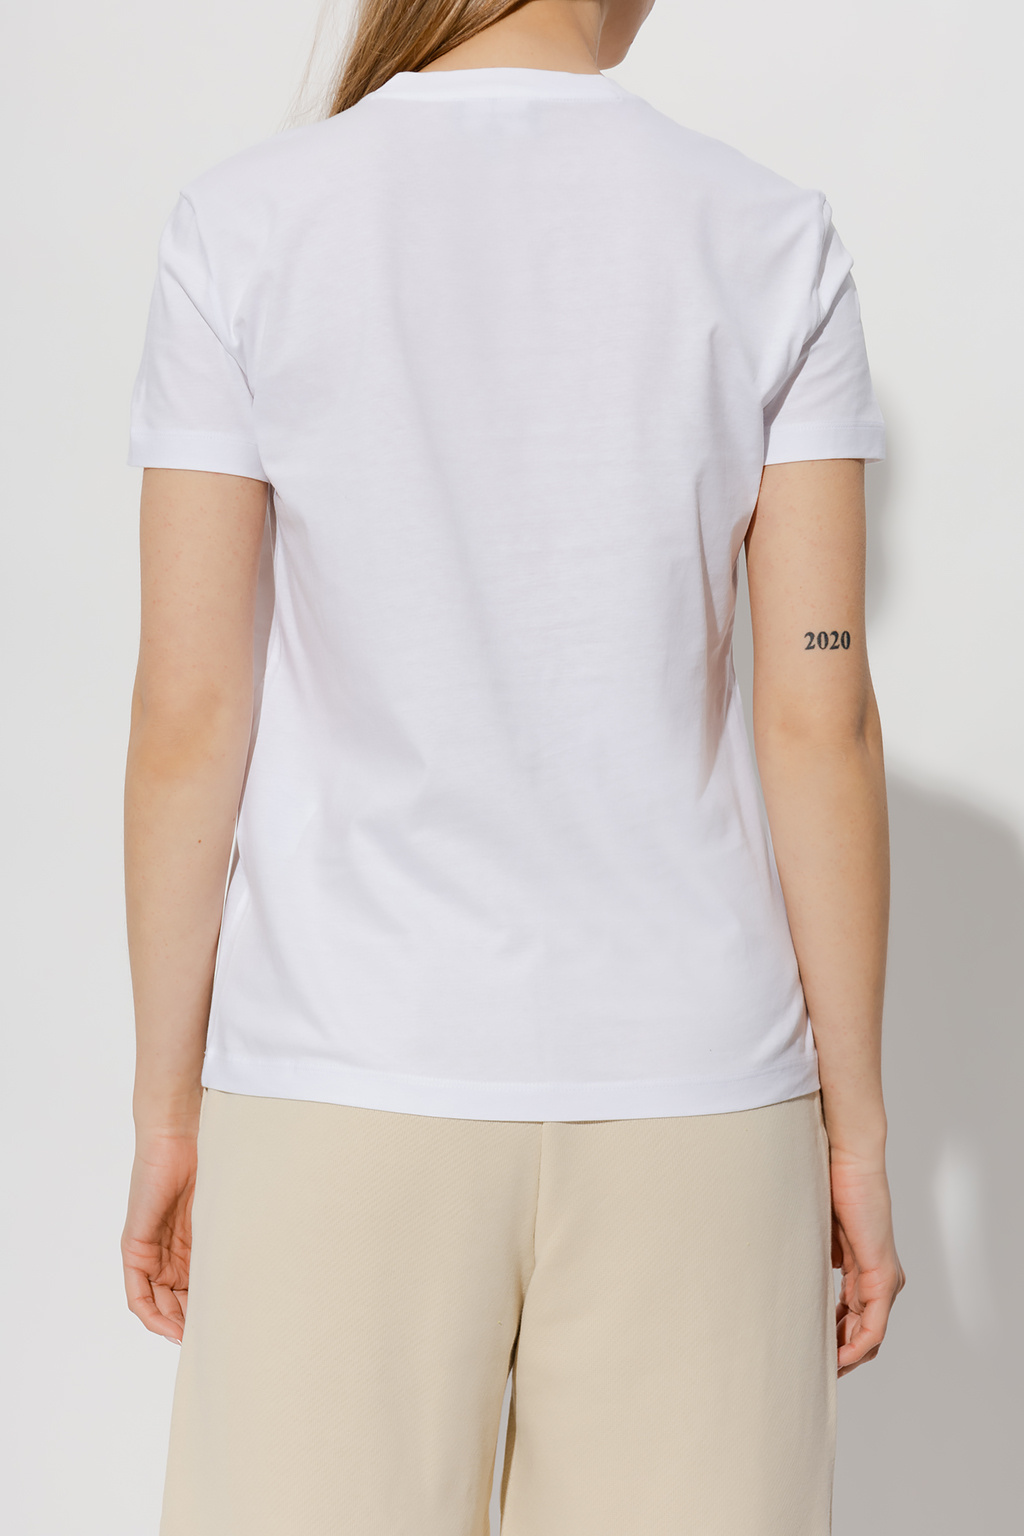 Emporio armani Ea7 T-shirt from the ‘Sustainable’ collection